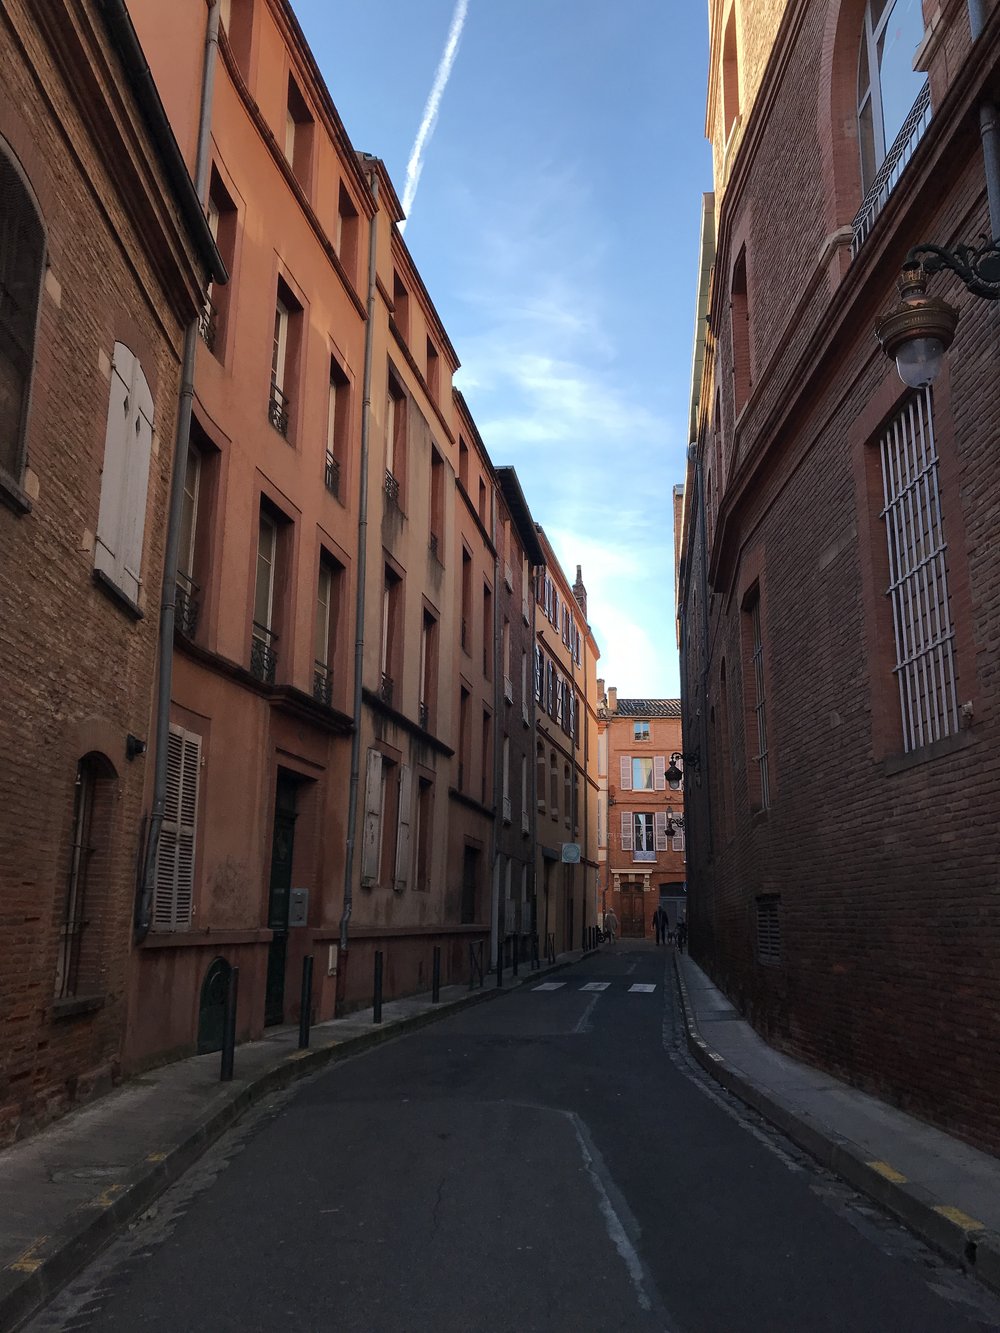 Cobble stoned streets in Toulouse, France